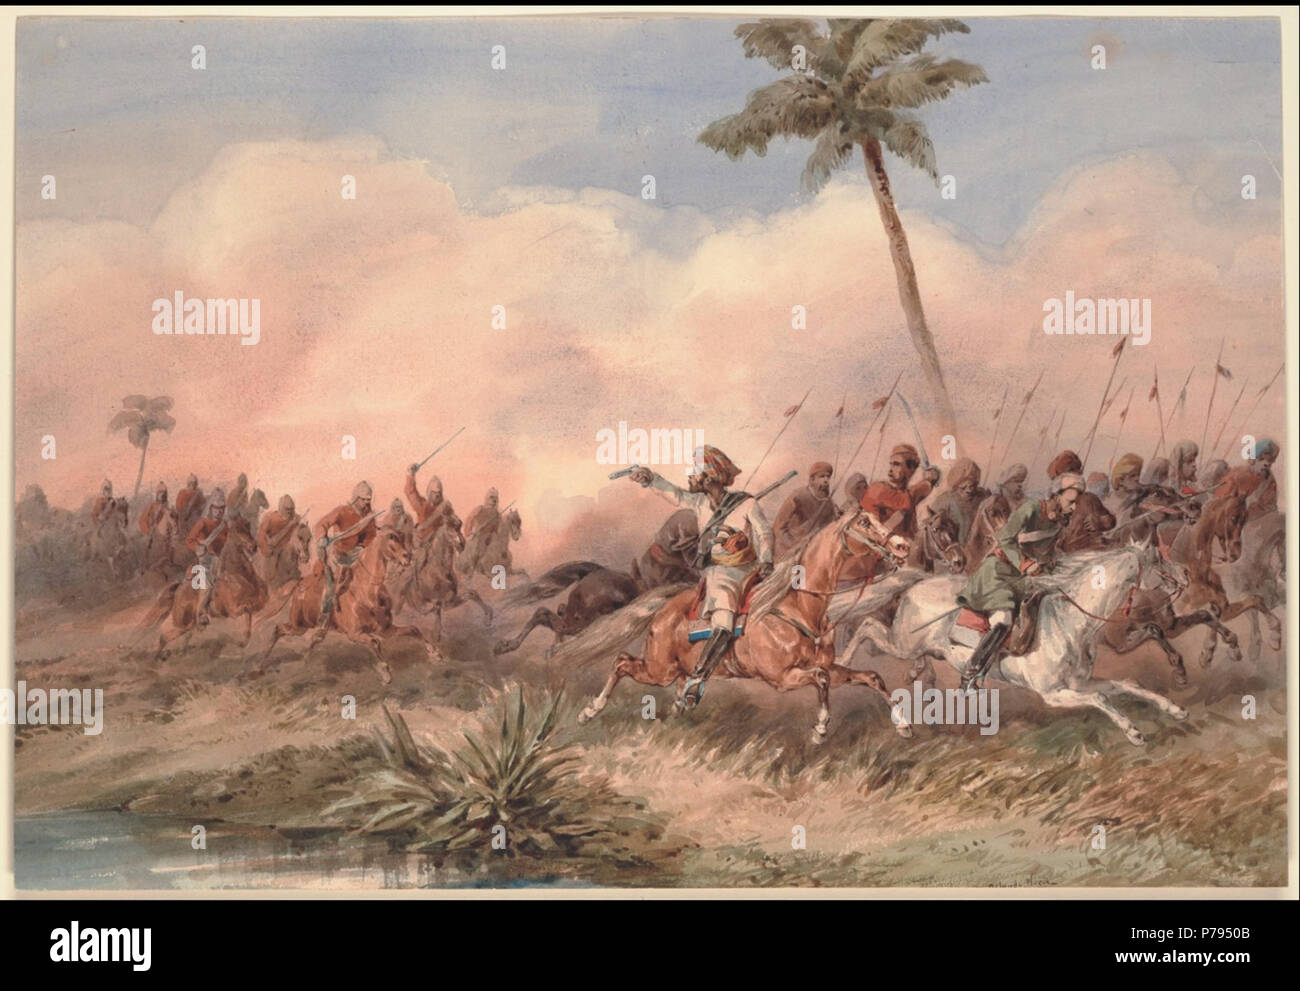 English: The 2nd Dragoon Guards, the Queen's Bays, routing the Lucknow mutineers near the Hyderabad road, Original watercolor signed by Norie; dragoons at left pursuing fleeing mutineers at right. Prints, Drawings, and Watercolors from the Anne S.K. Brown Military Collection. Sepoy Rebellion, 1857-1858, Oblong folio; no margins; clean. Title supplied by cataloger. London, Parker Gallery, 1958 . 1 January 1859 6 Sepoy Rebellion 1857, Hyderabad India. Stock Photo